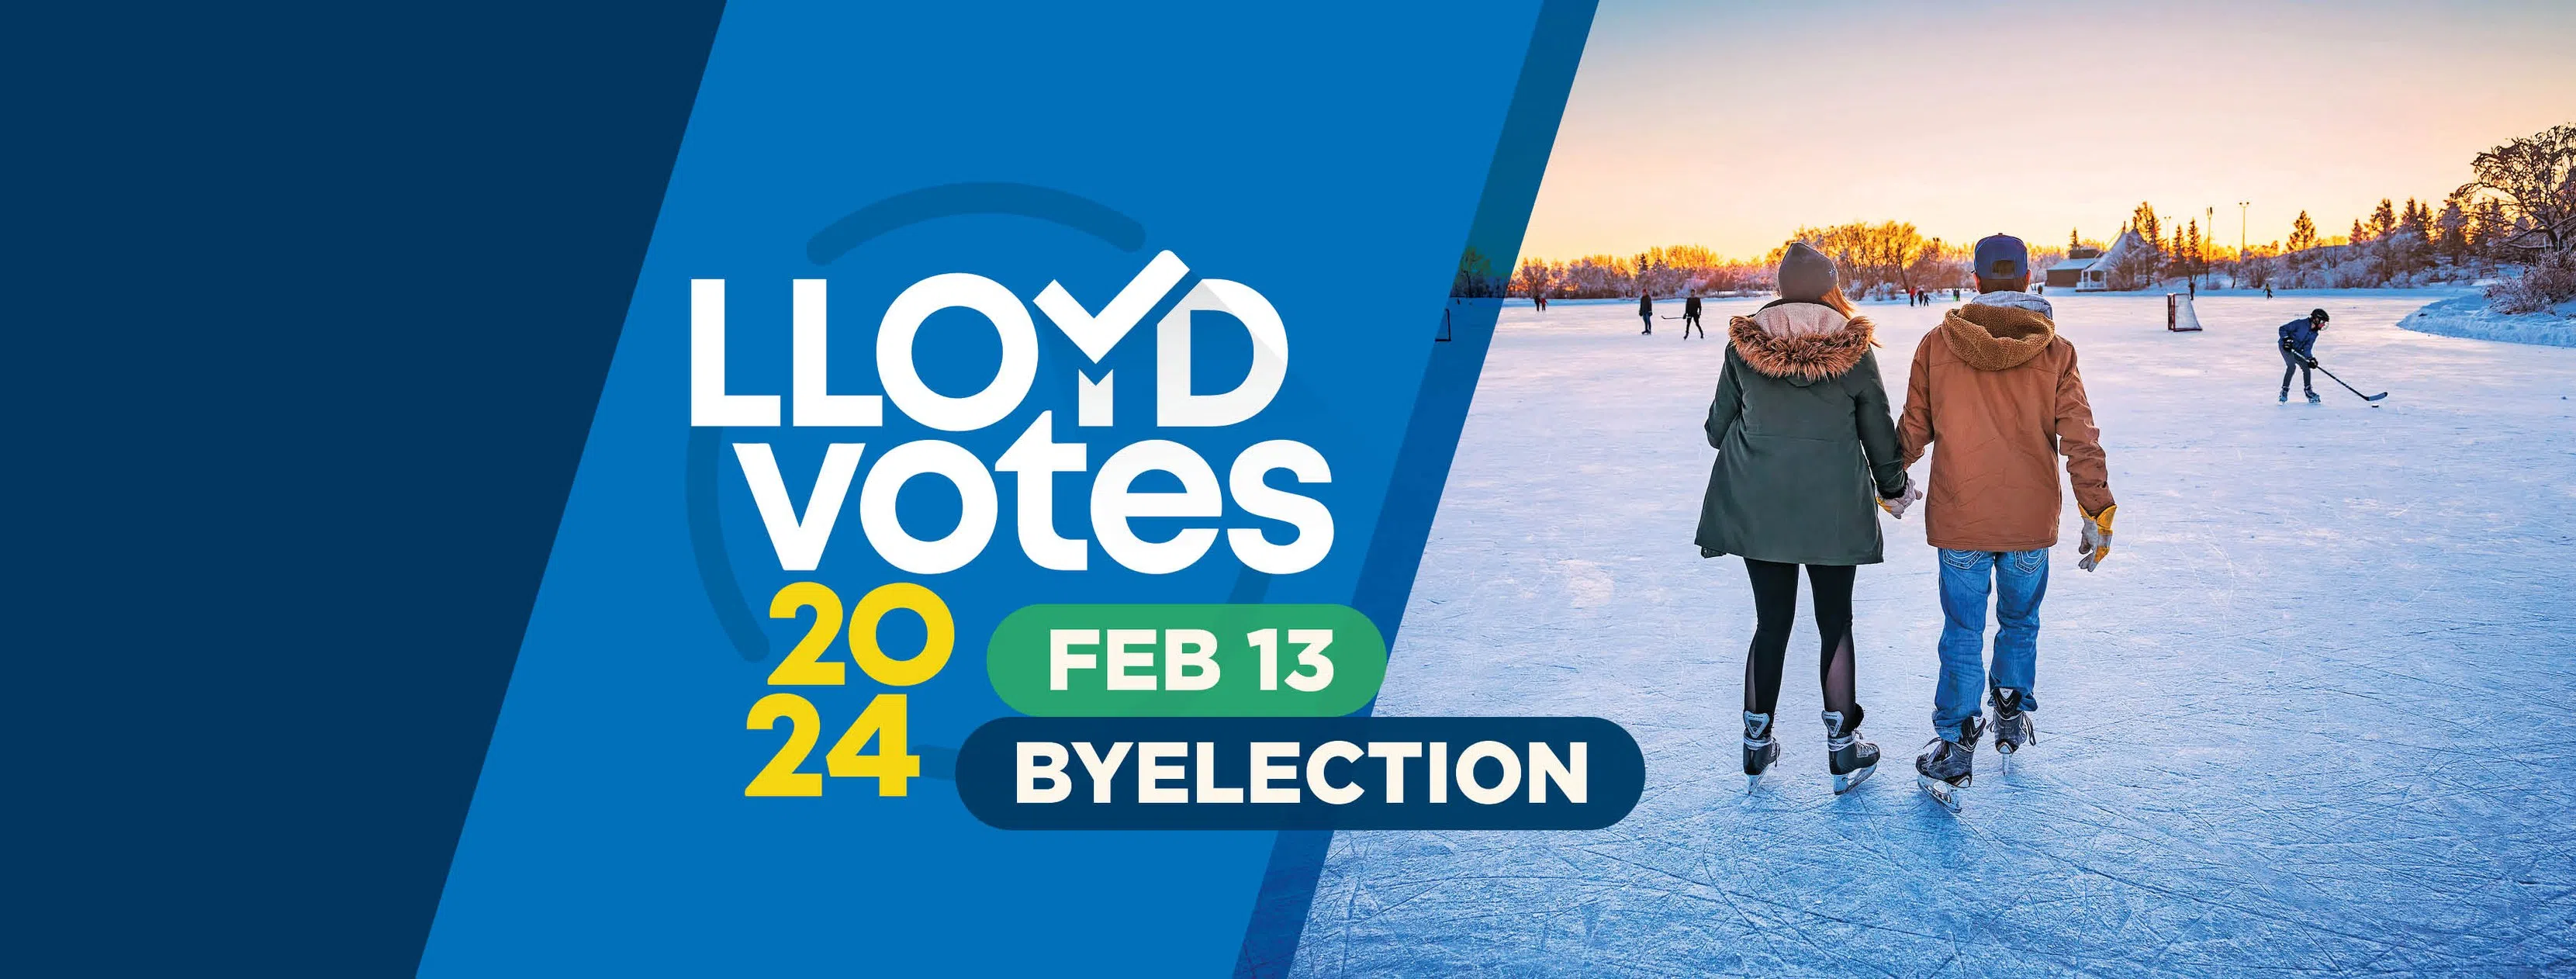 Nominations close for Lloydminster byelection, Returning Officer releases unofficial candidate list